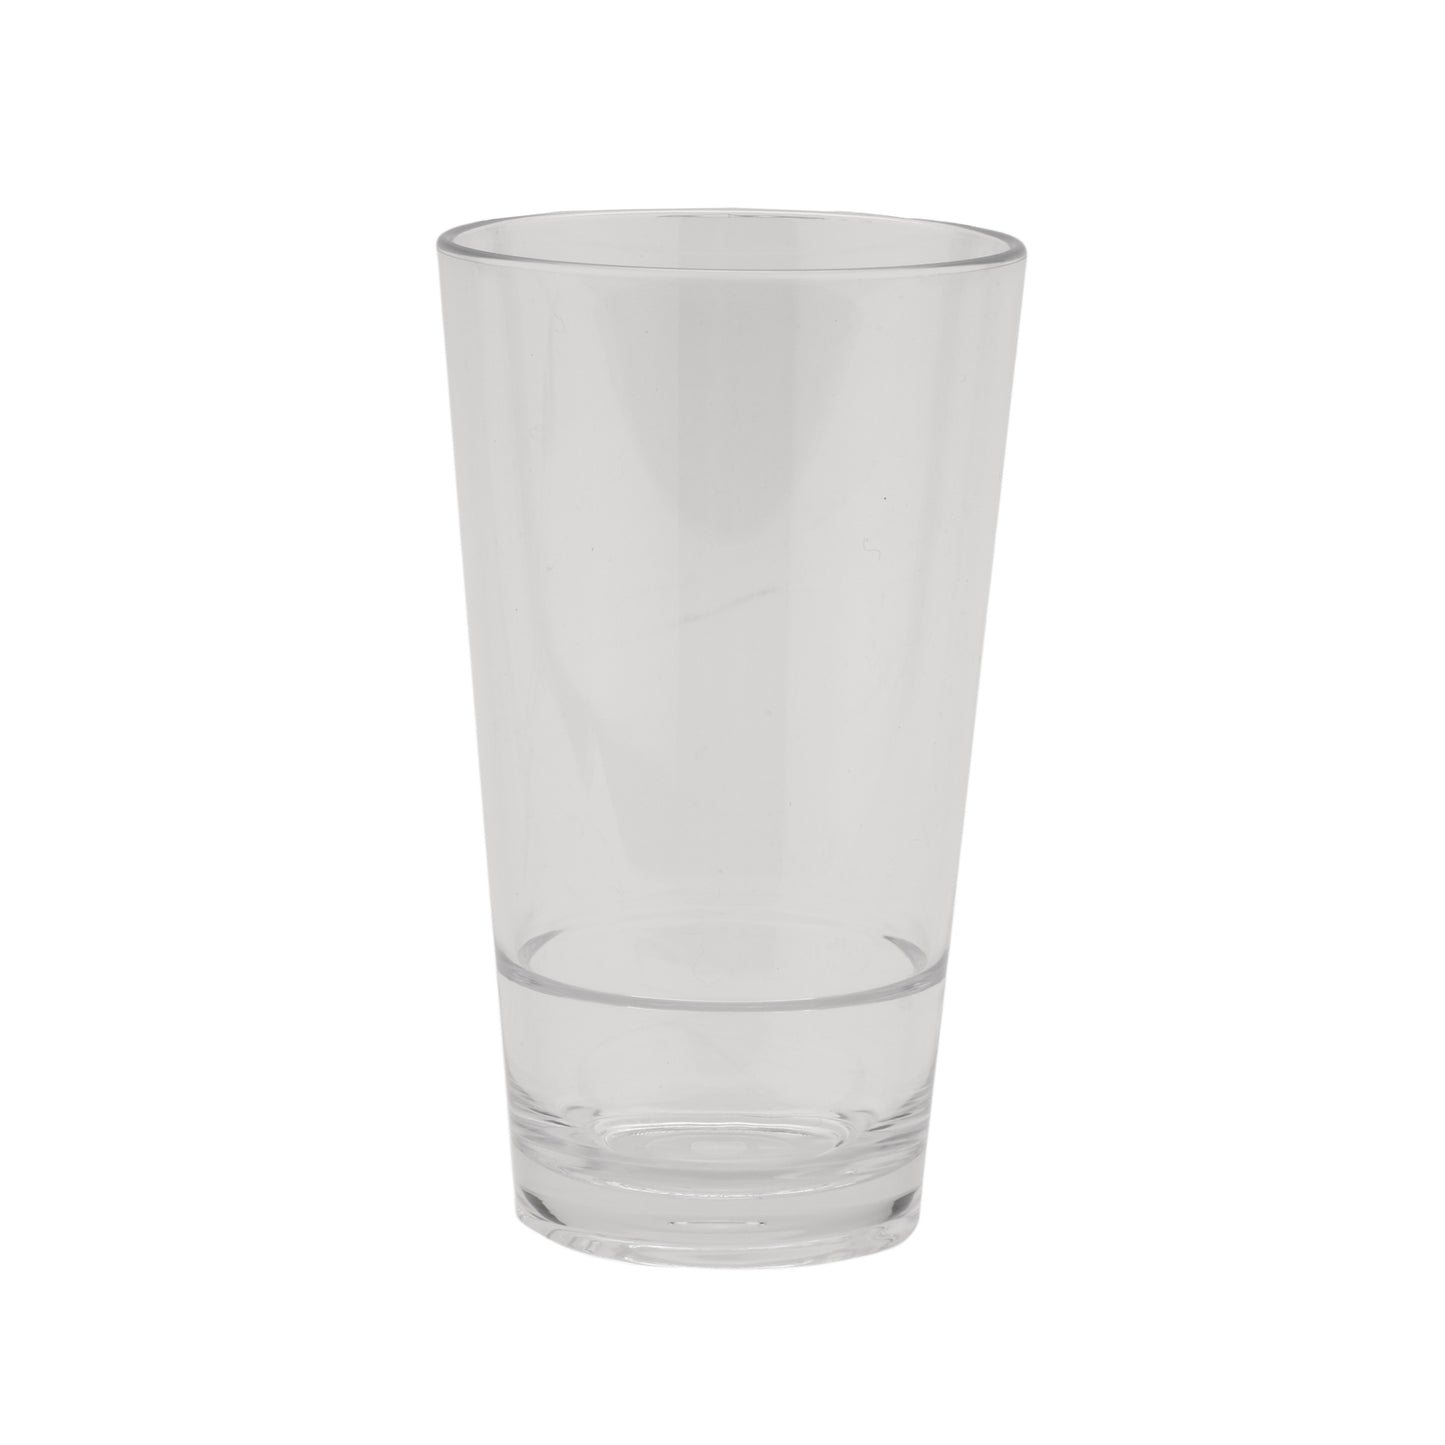 14 oz. (14.8 oz. Rim-Full), 3.2" Stackable Glass, 5.5" Tall (12 Pack)